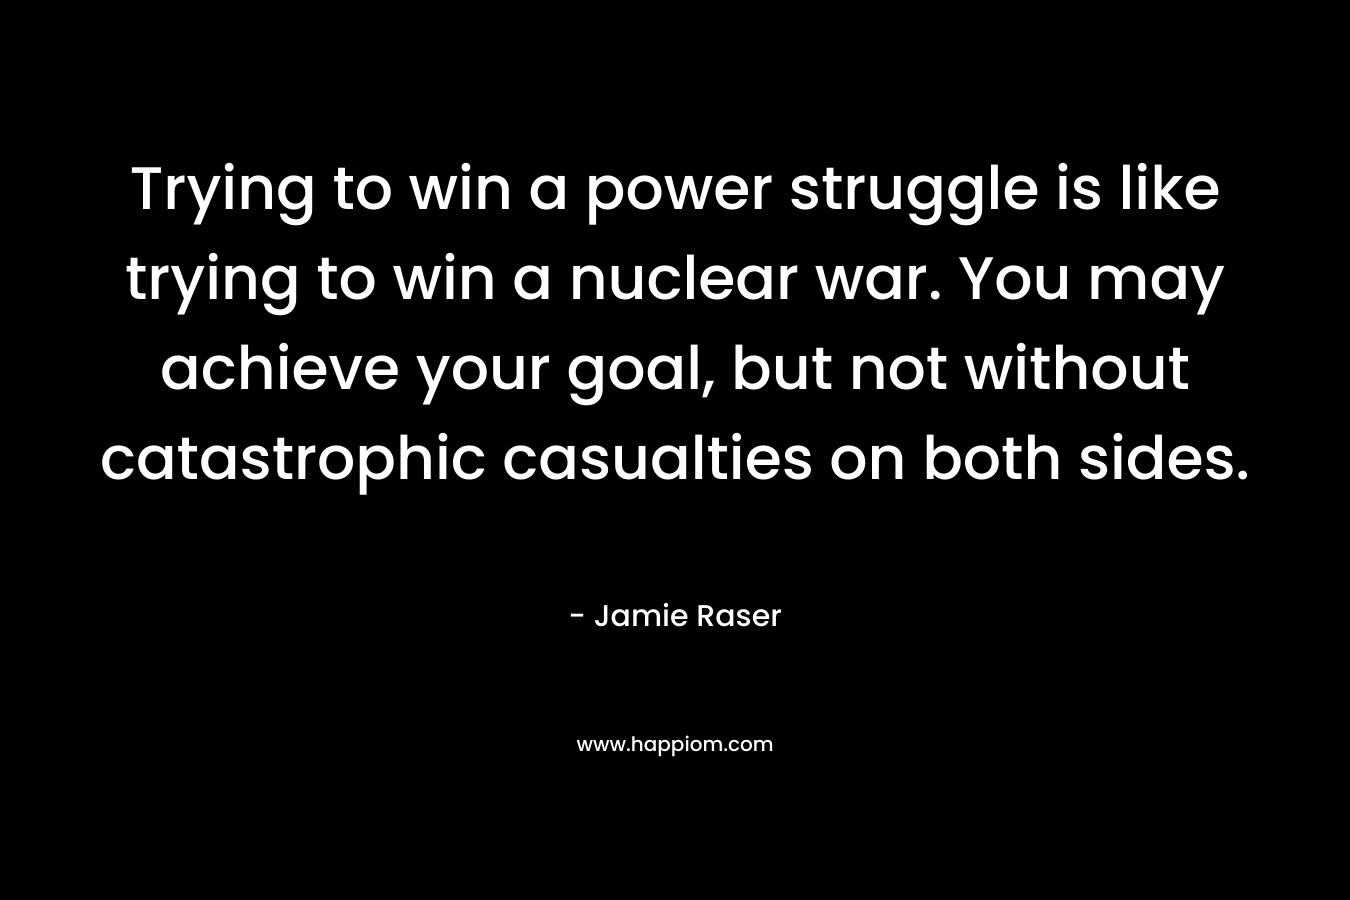 Trying to win a power struggle is like trying to win a nuclear war. You may achieve your goal, but not without catastrophic casualties on both sides. – Jamie Raser